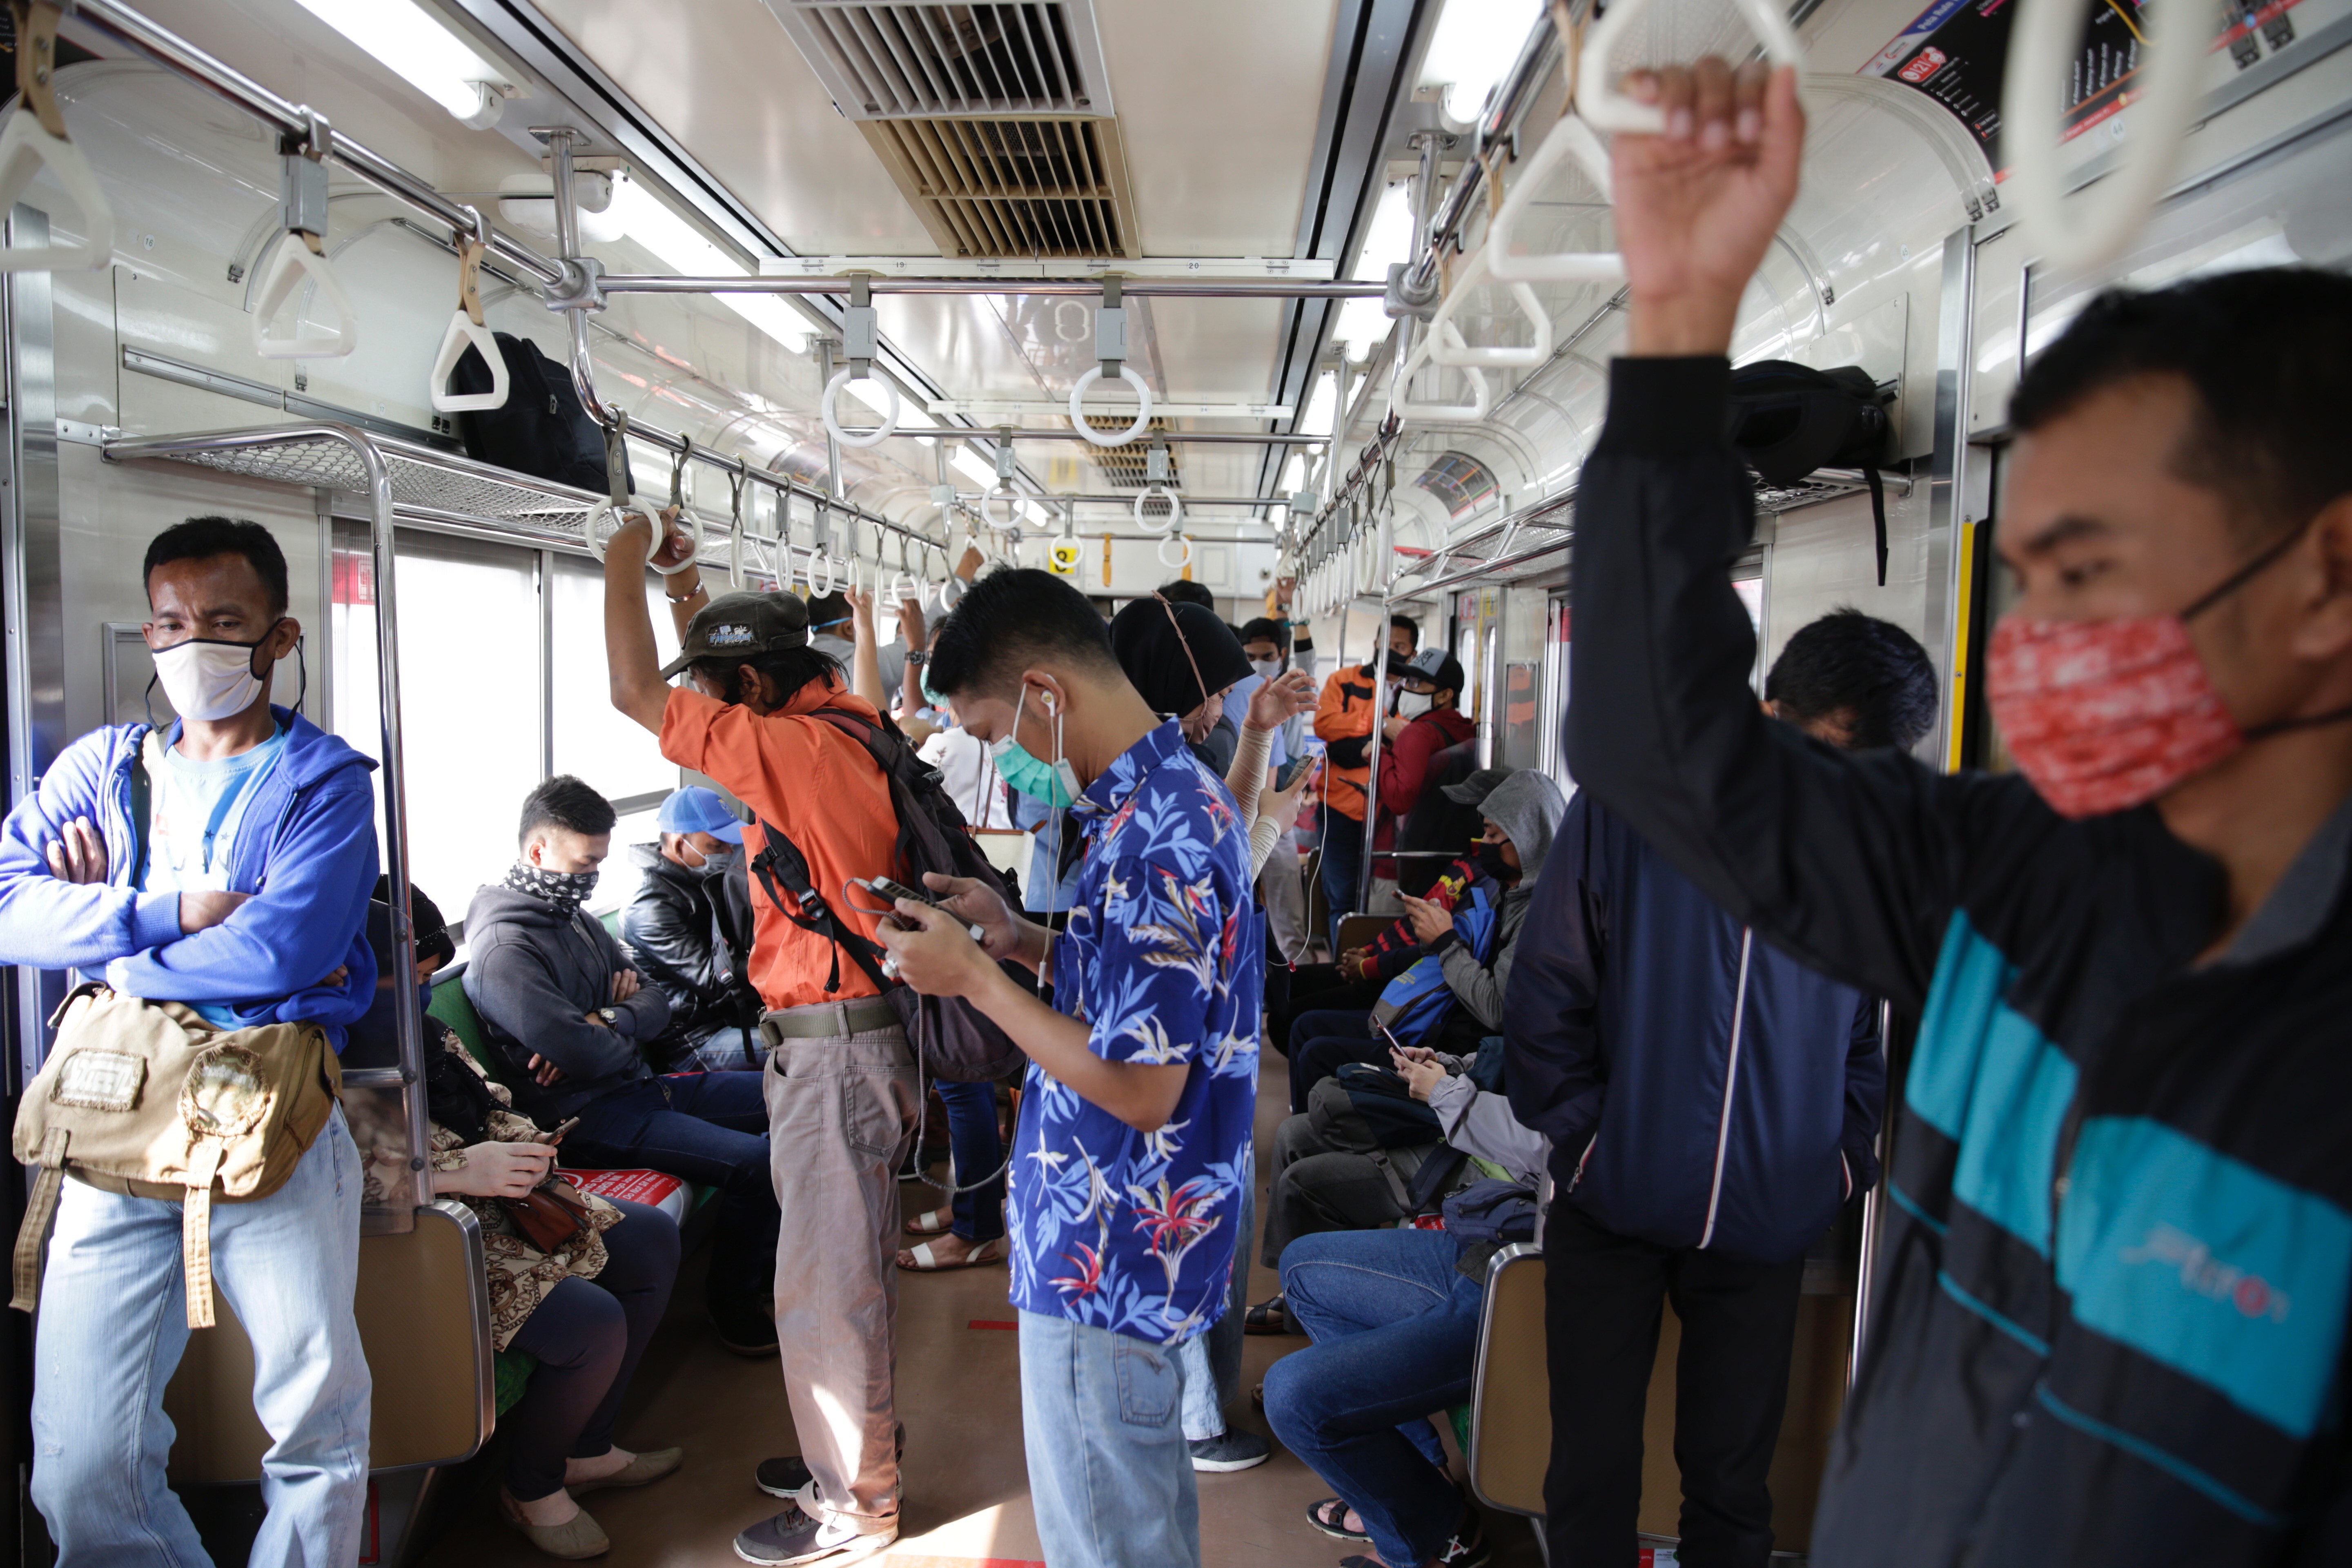 Passengers pictured on a commuter-line train in Bogor, Indonesia, on June 10. Photo: EPA